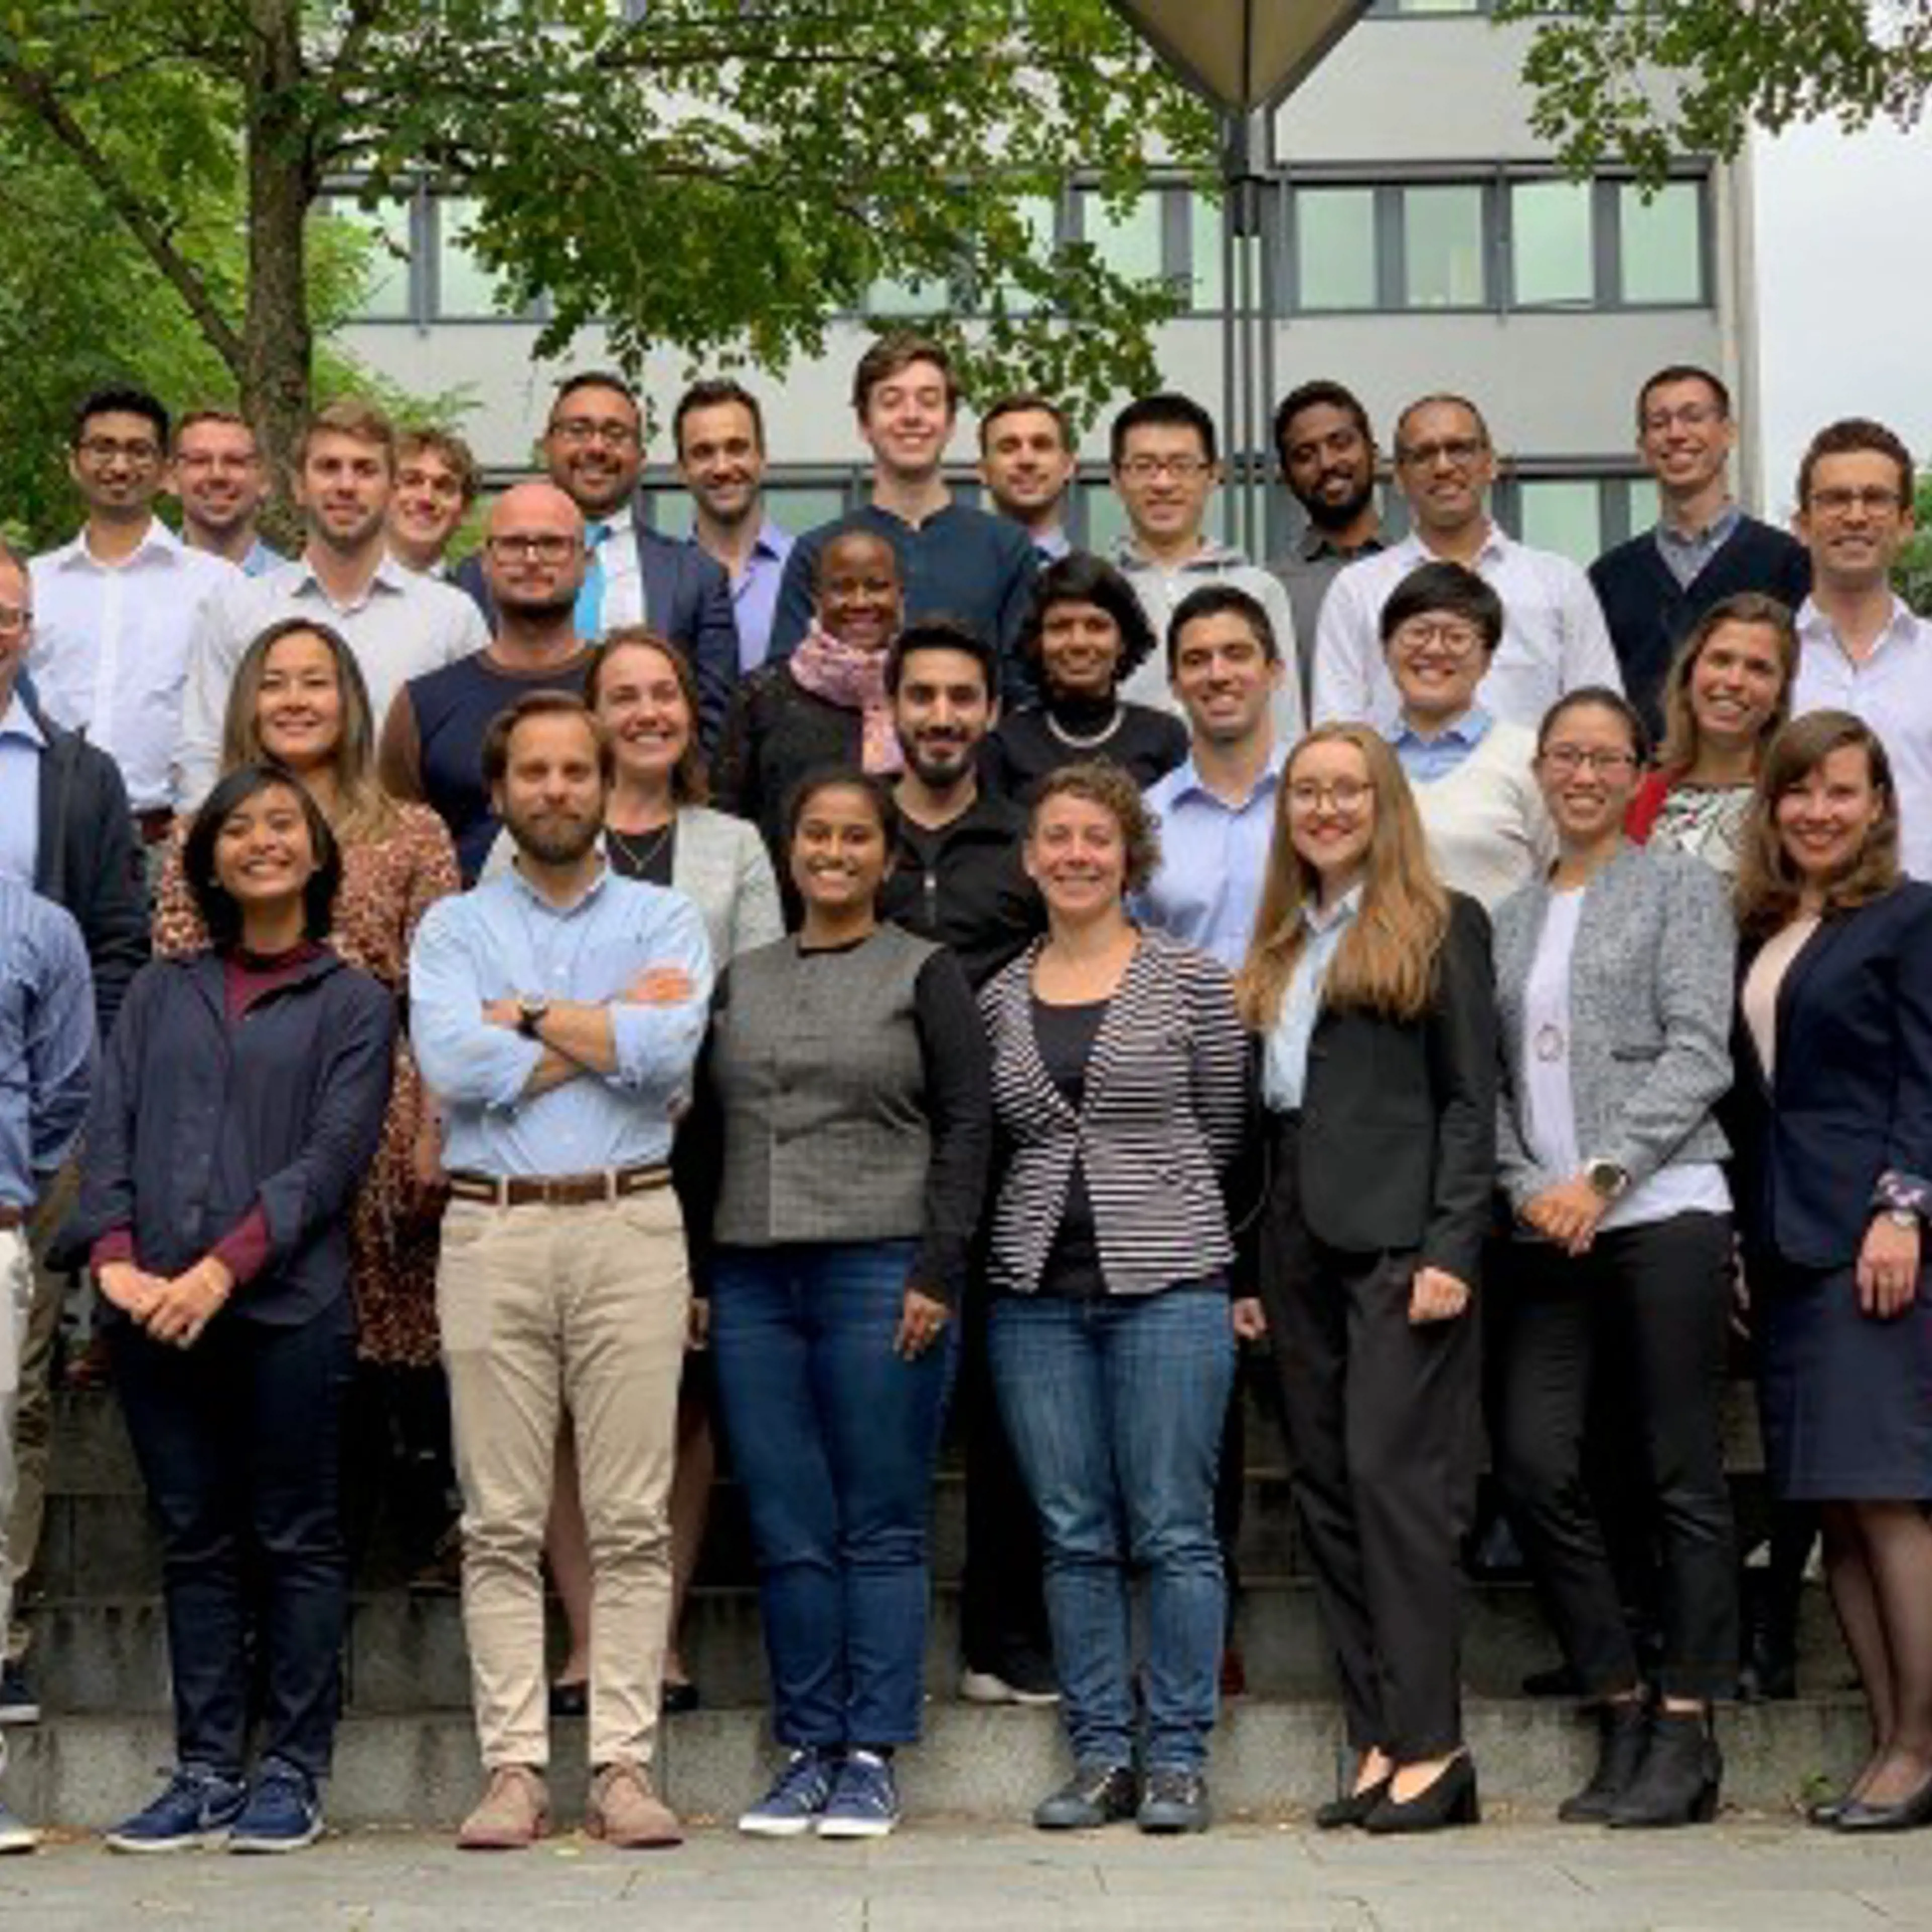 Picture of the Copenhagen MBA class of 2020